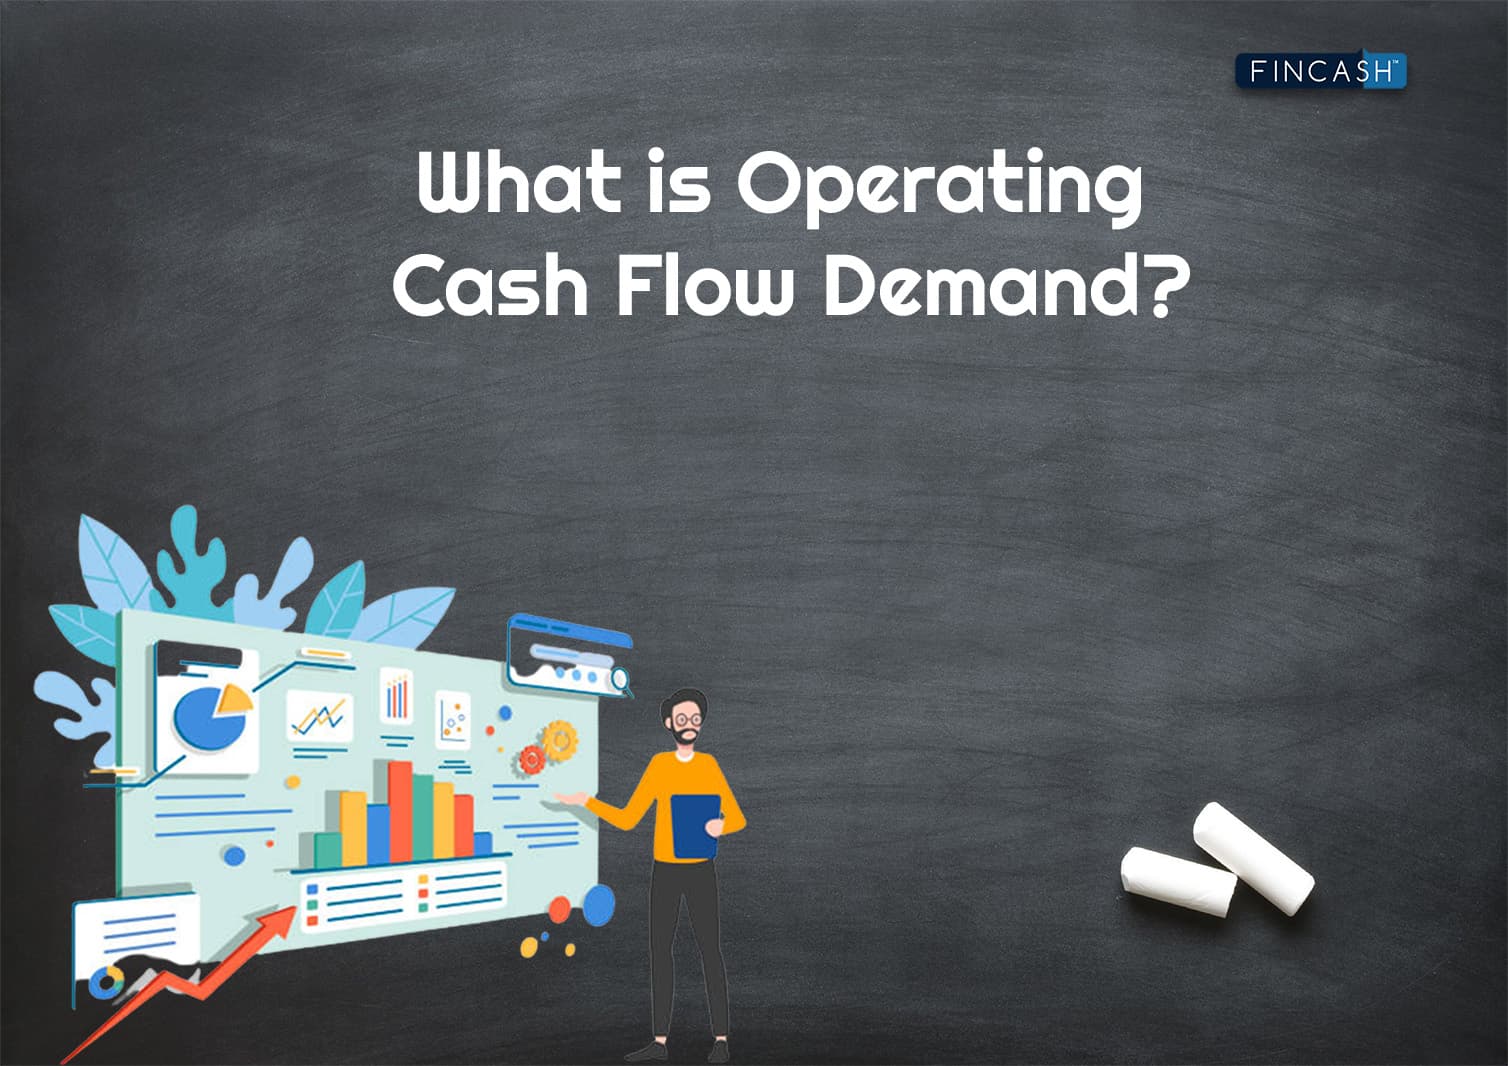 What is Operating Cash Flow Demand (OCFD)?